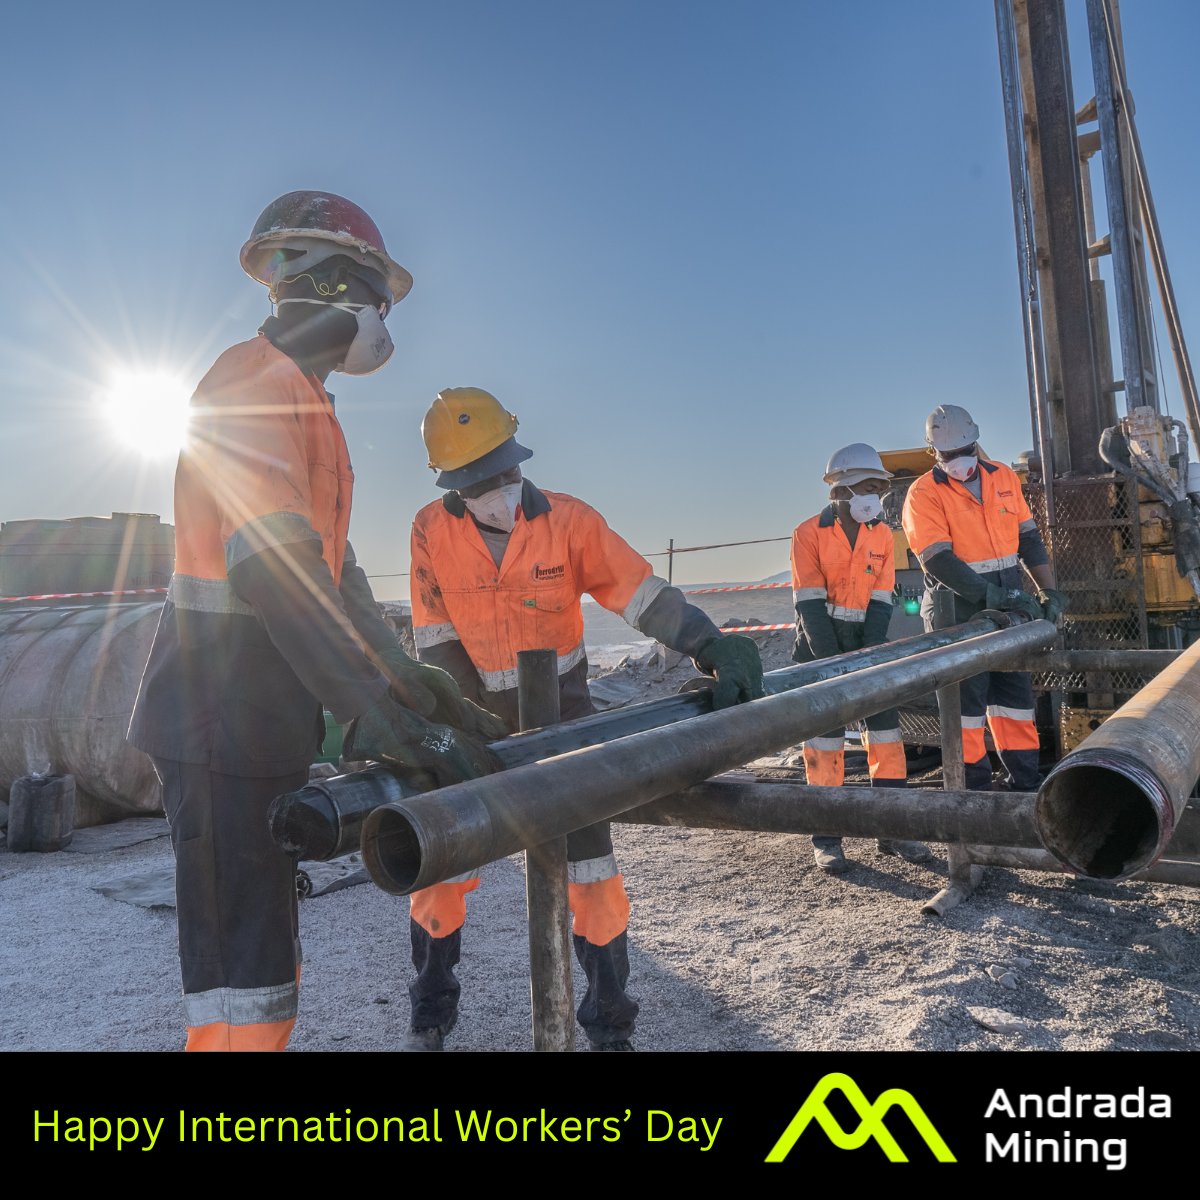 Happy International Workers' Day! Thank you to our Andrada Mining team for your dedication. Here's to continued success and growth towards a brighter future - together. #AndradaMining #InternationalWorkersDay